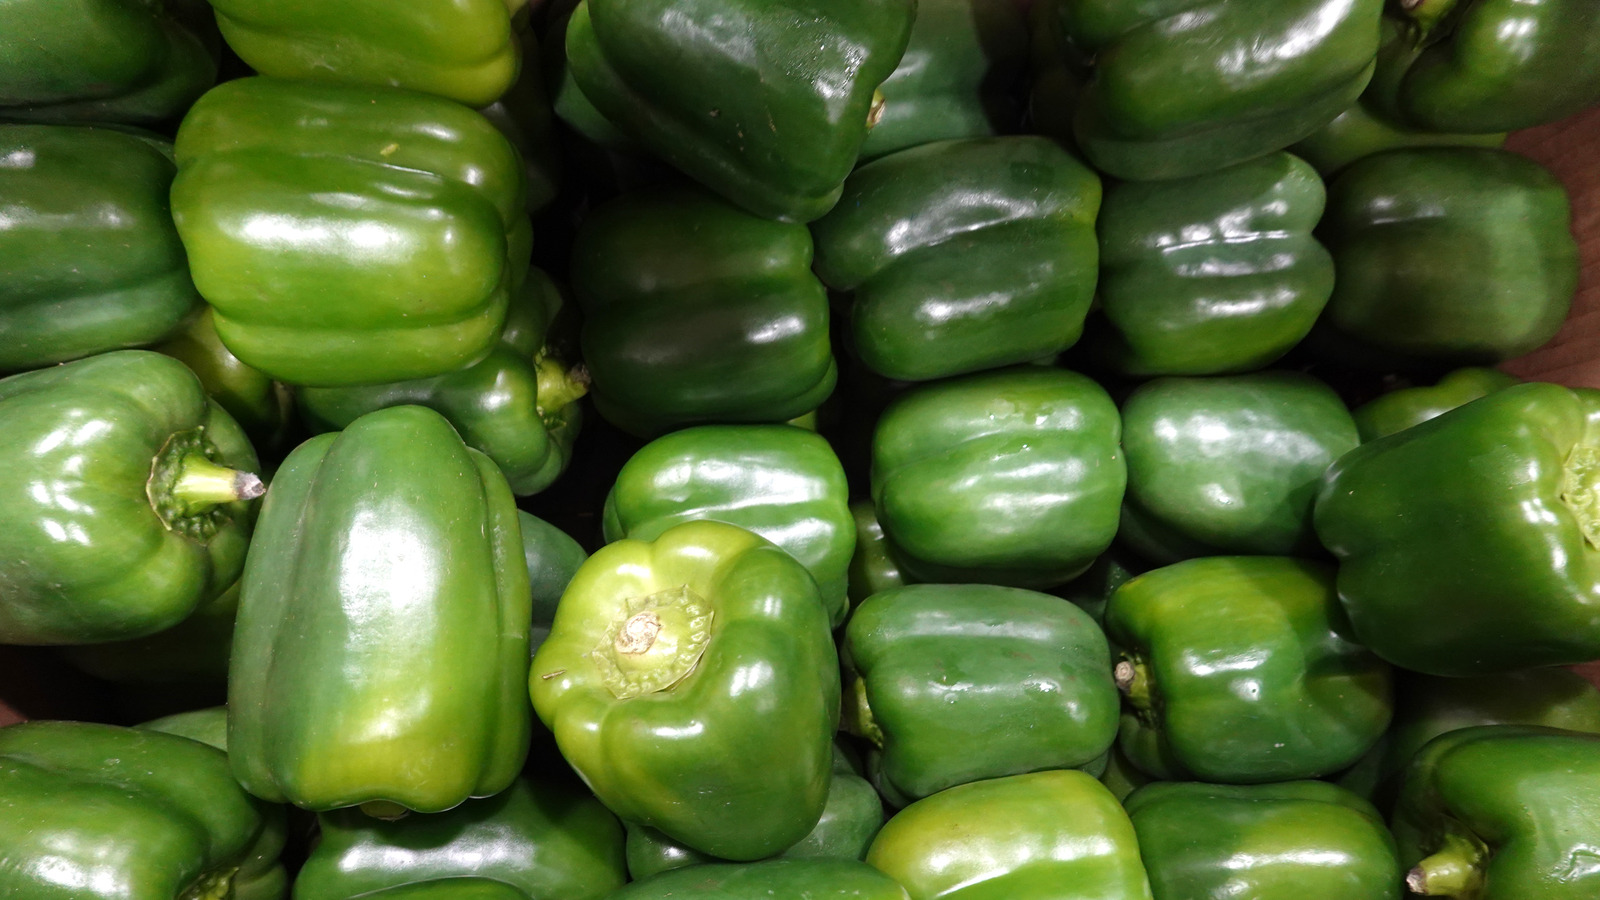 Do Bell Peppers Need to Be Refrigerated?